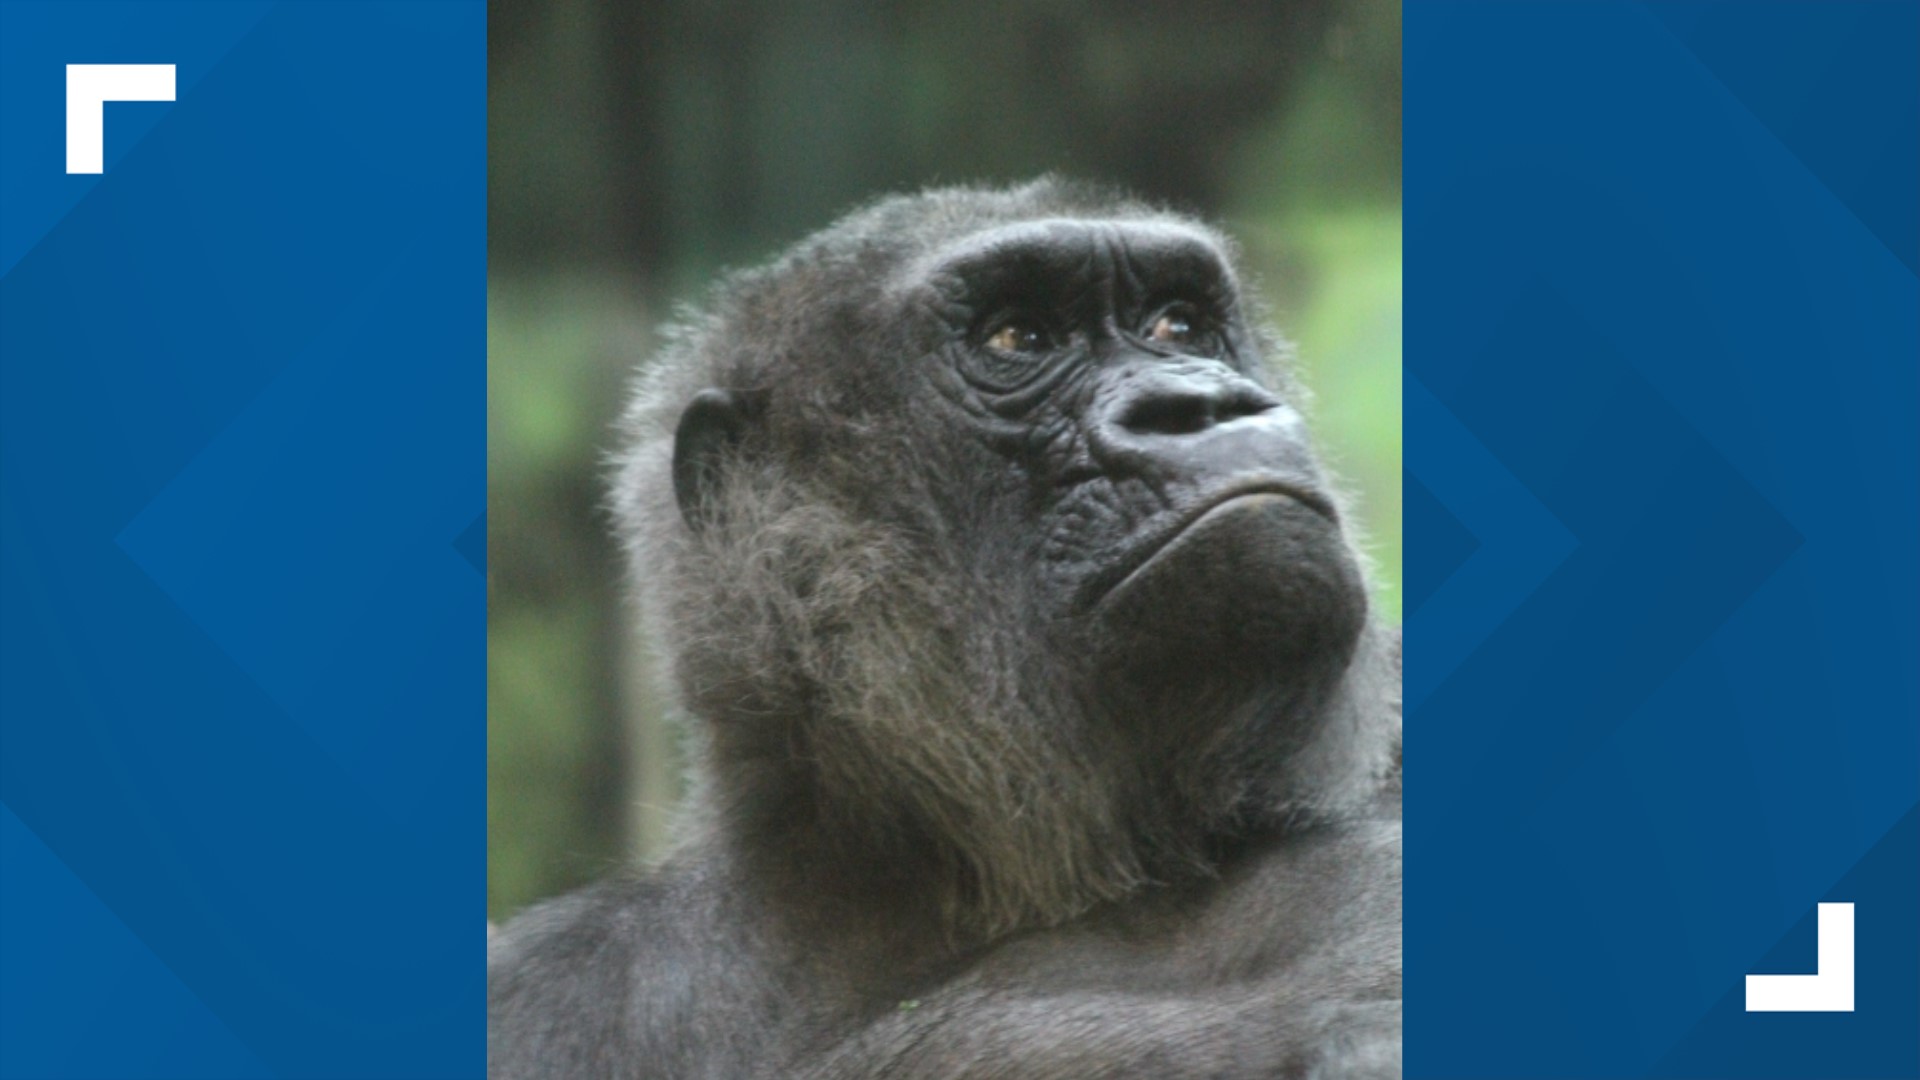 Despite a typical life expectancy of a female gorilla being 39 years, Helen surpassed that and was 64-years-old.